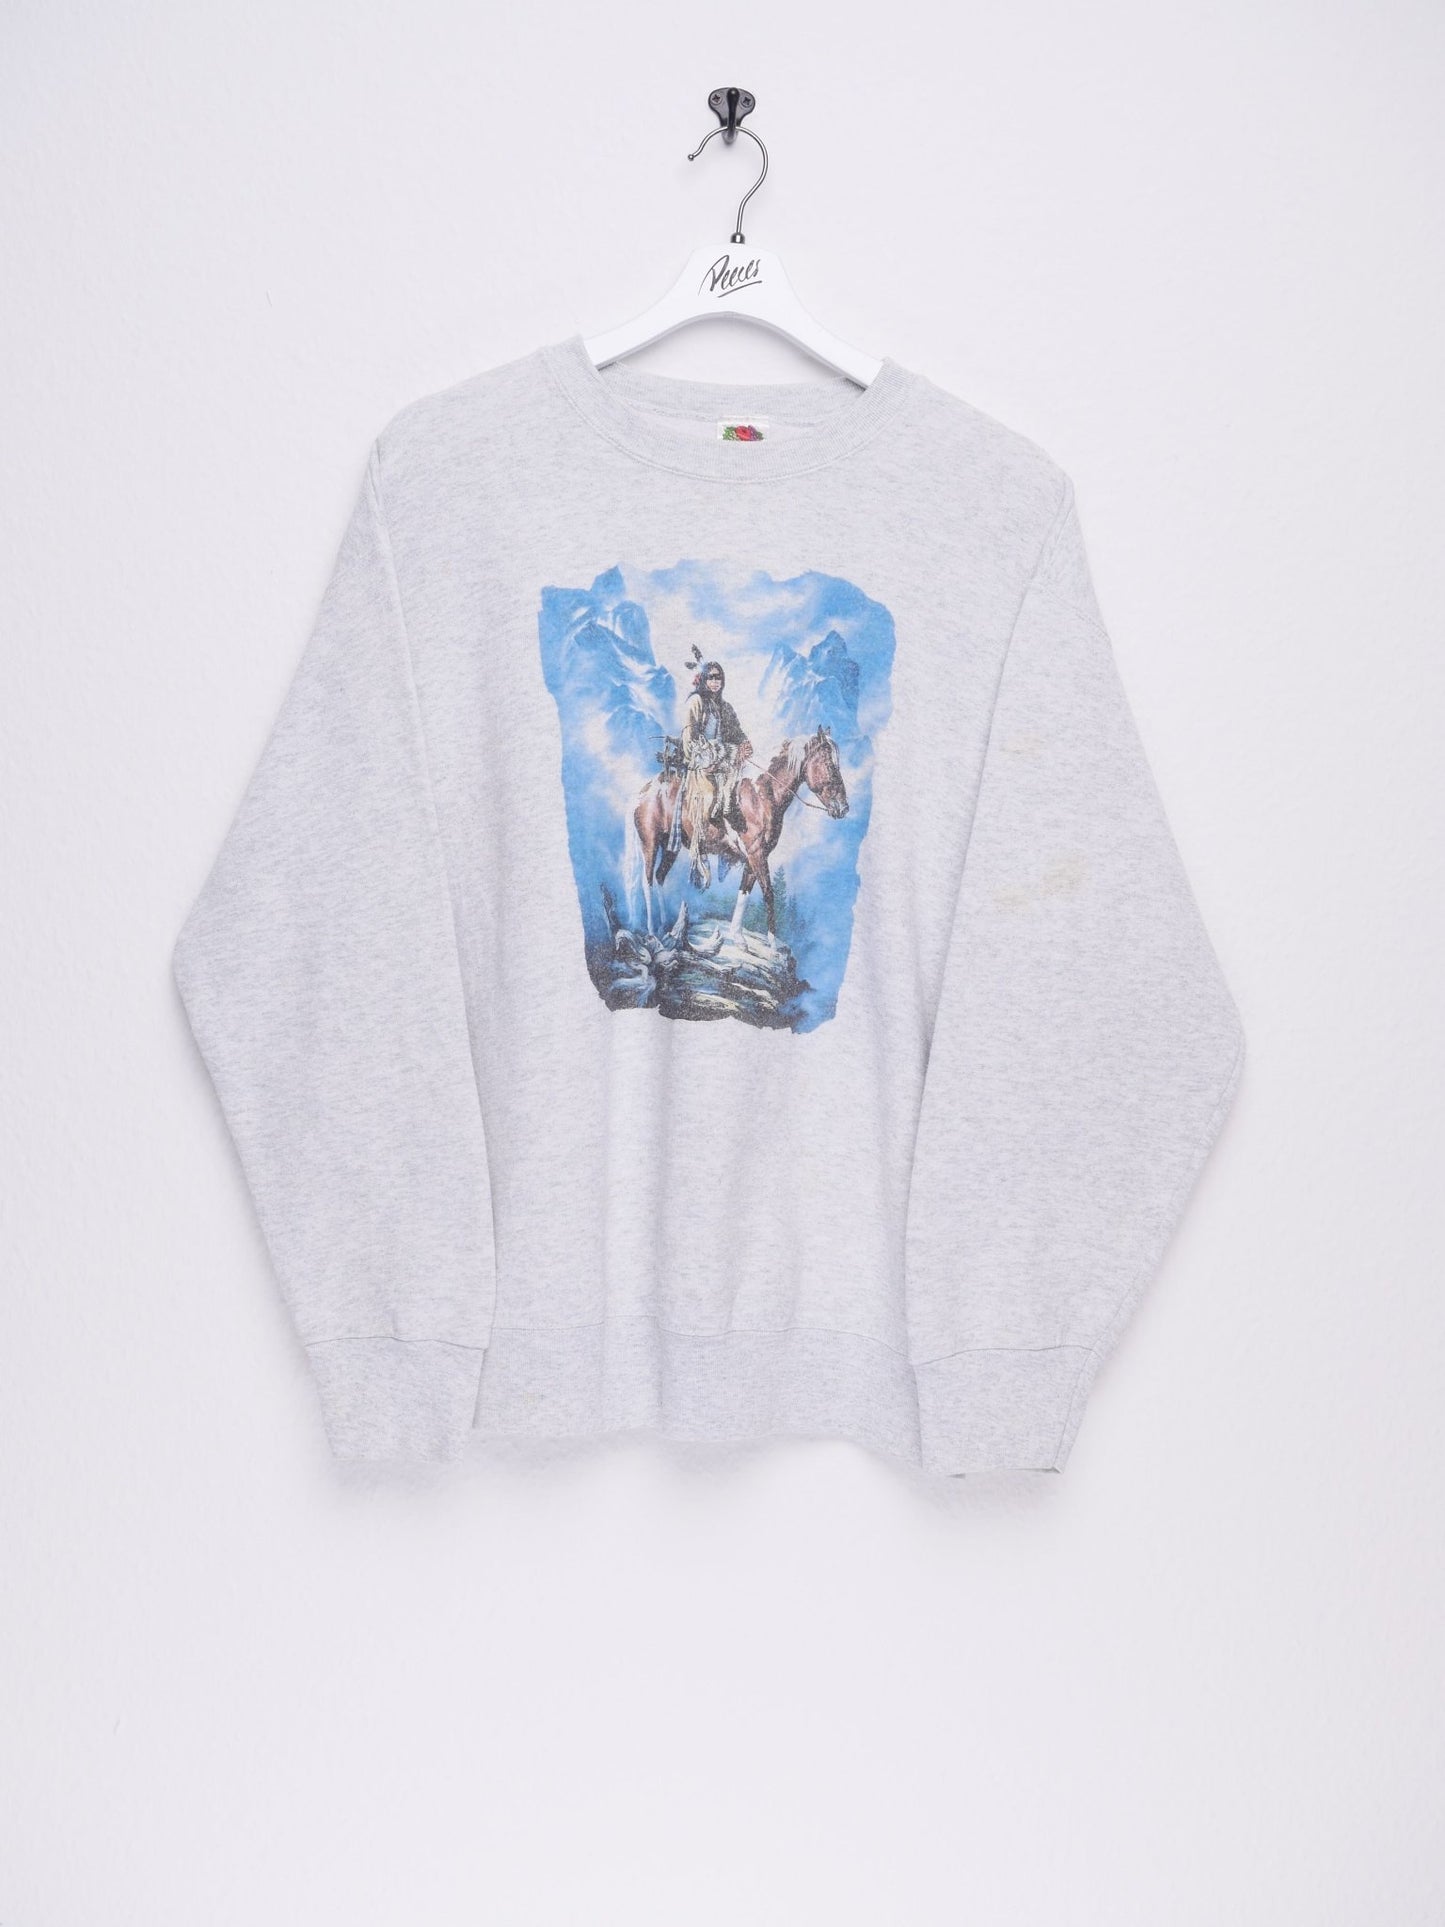 'Indigenous' printed Graphic grey Sweater - Peeces